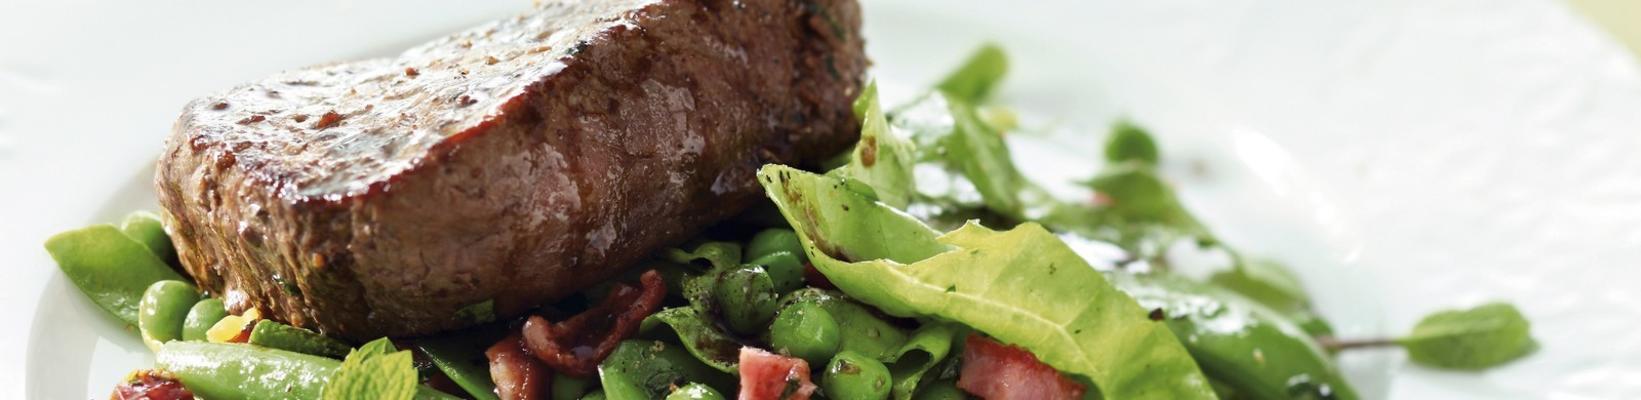 steak with balsamic vinegar and green vegetable dish